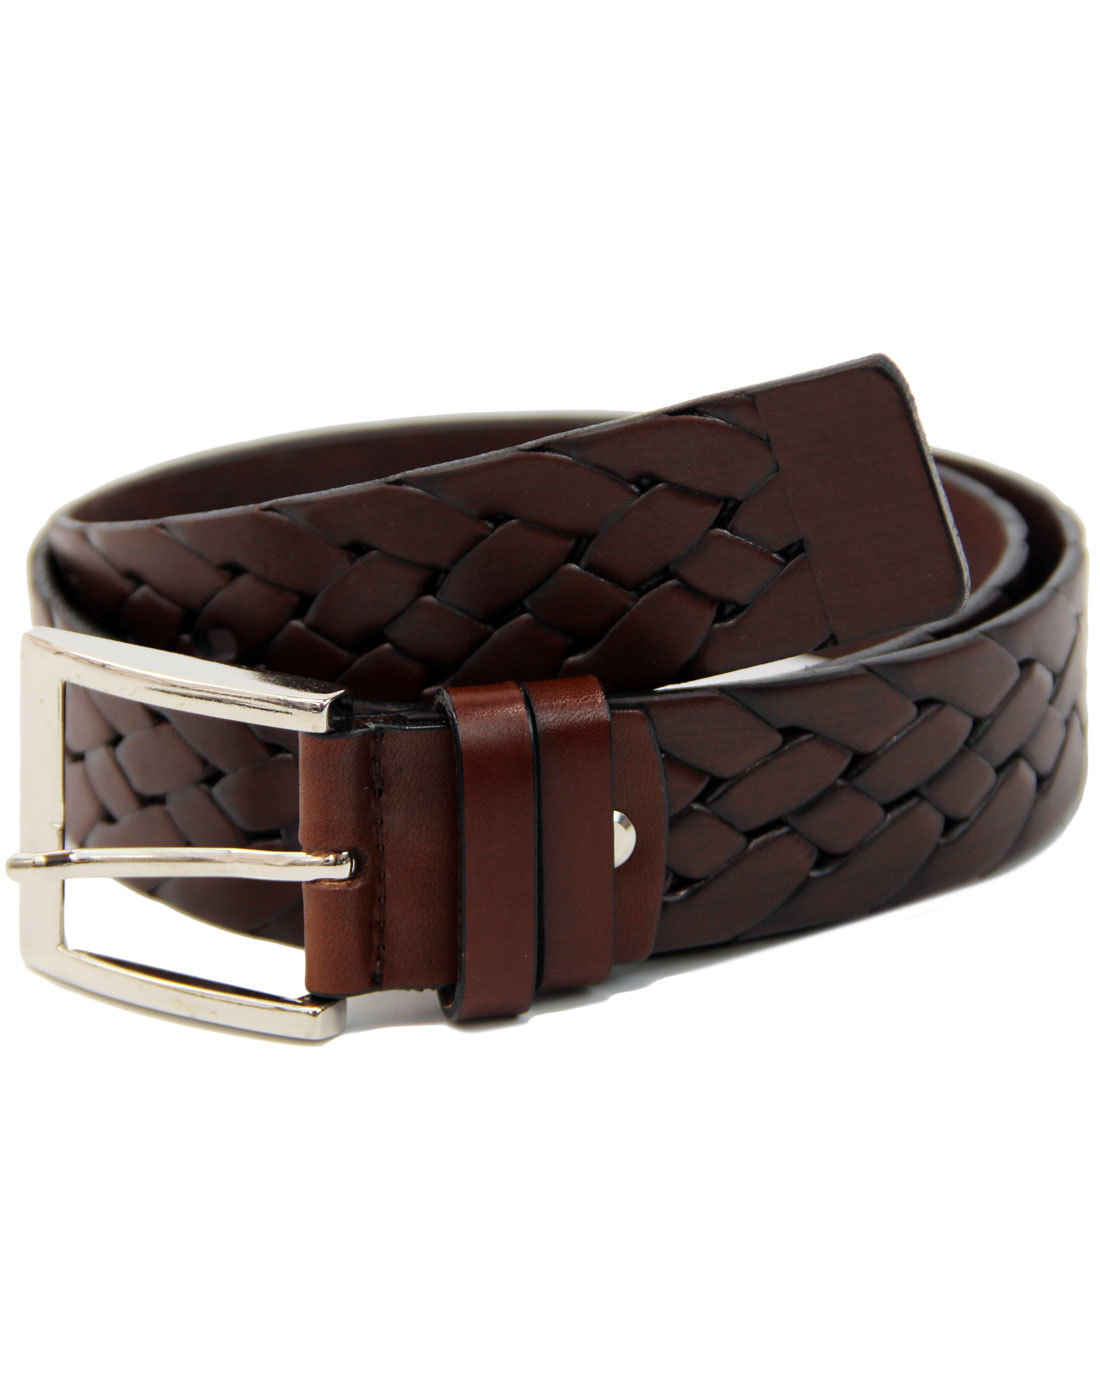 LACUZZO Retro 1960s Mod Woven Stamp Leather Belt in Brown